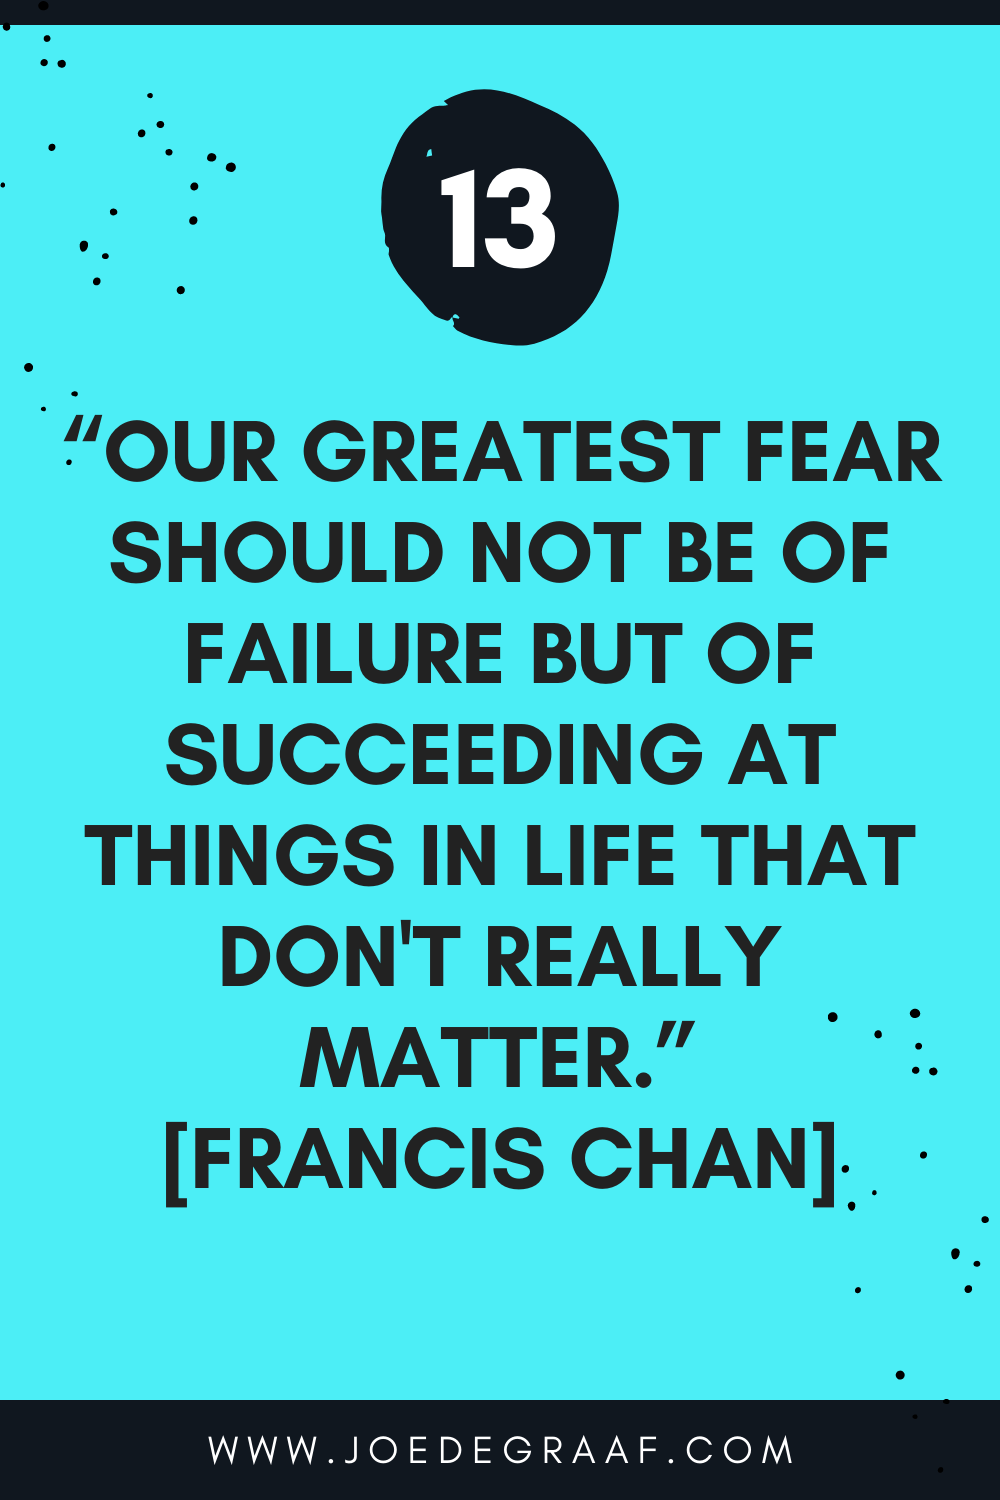 Francis Chan work motivation quote